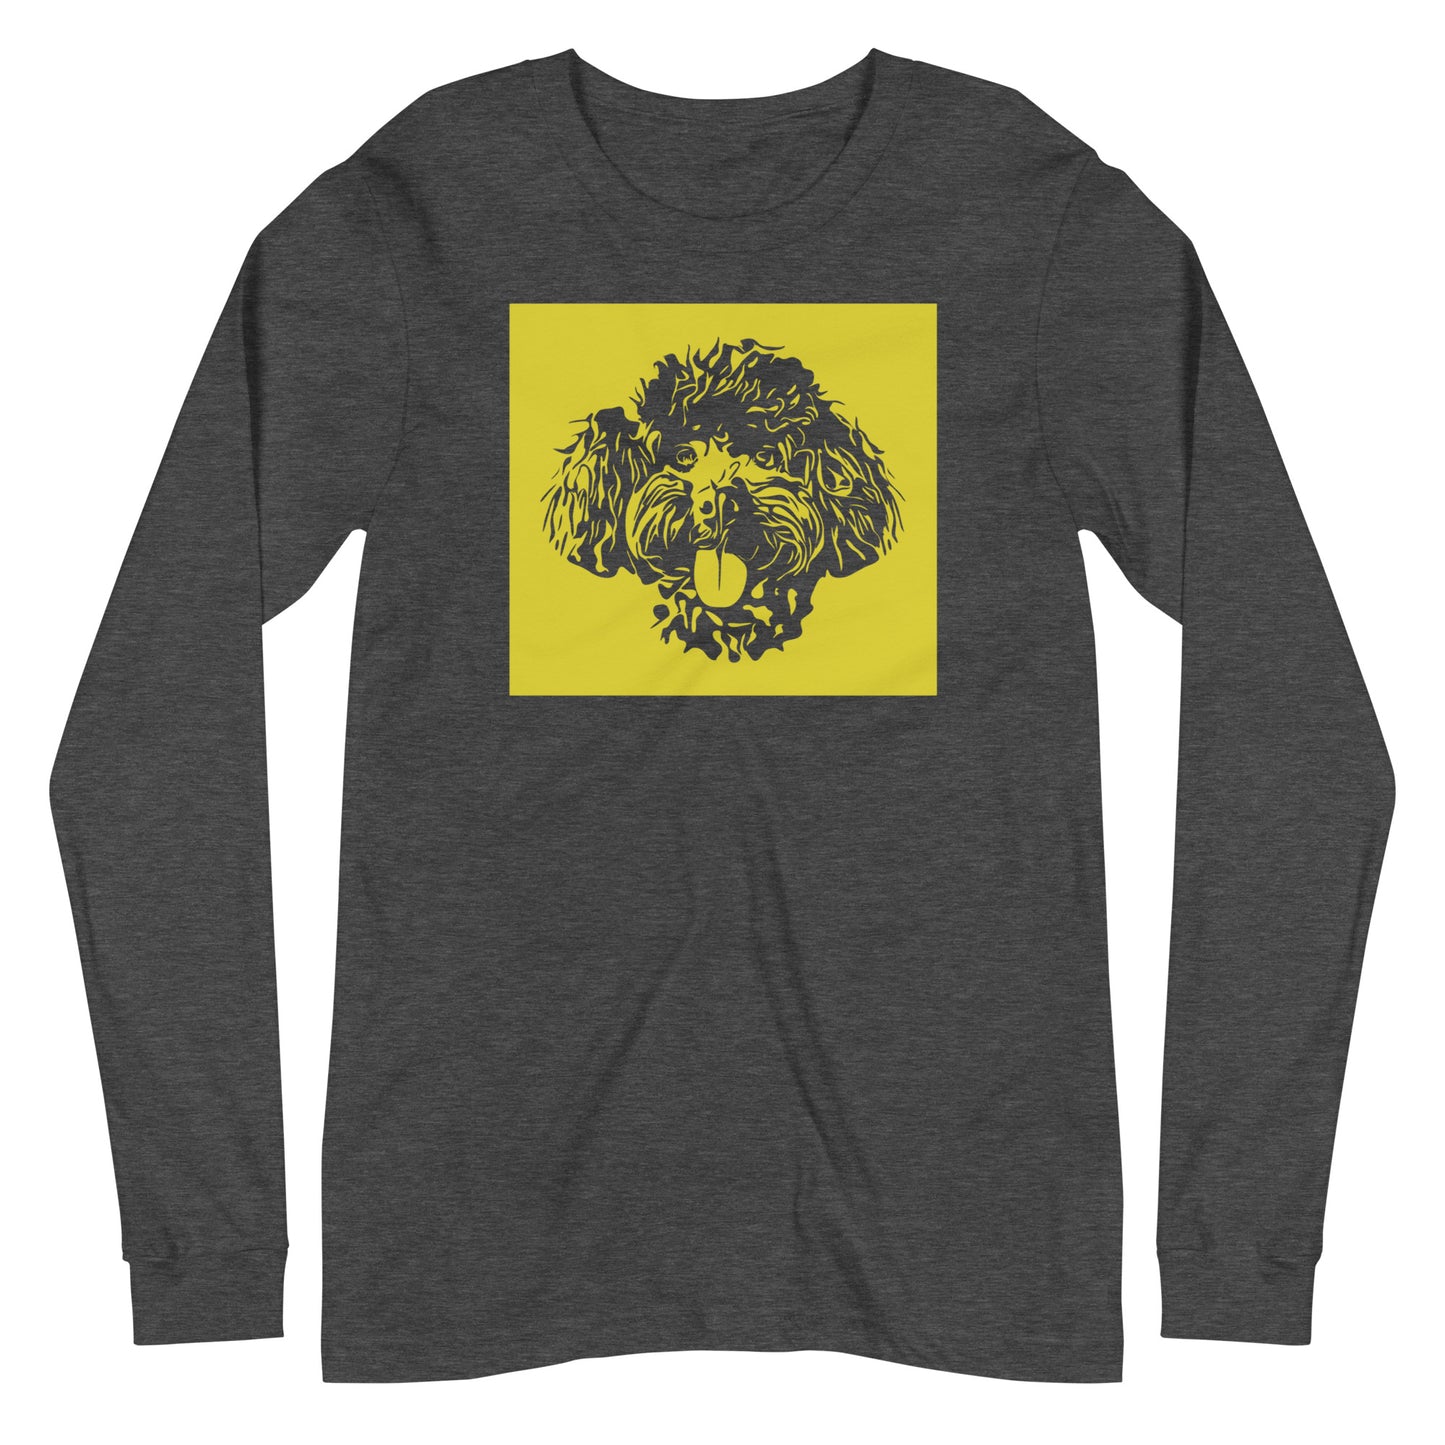 Toy Poodle face silhouette with yellow background square on unisex dark grey heather long sleeve t-shirt